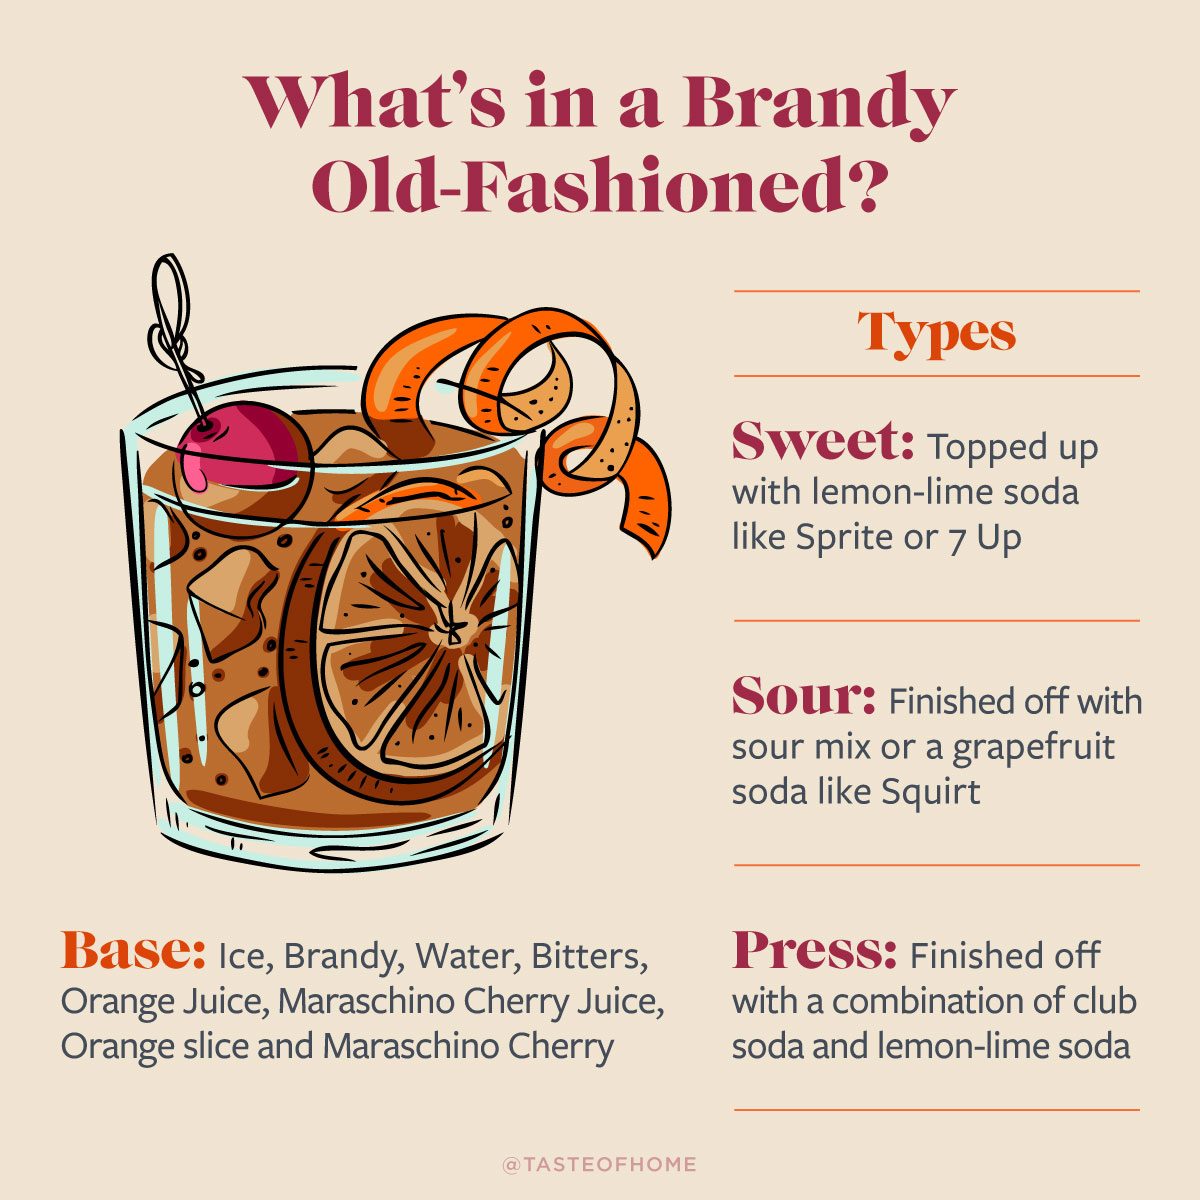 https://www.tasteofhome.com/wp-content/uploads/2023/02/whats-in-a-brandy-old-fashioned-graphic-getty-images.jpg?fit=700%2C700